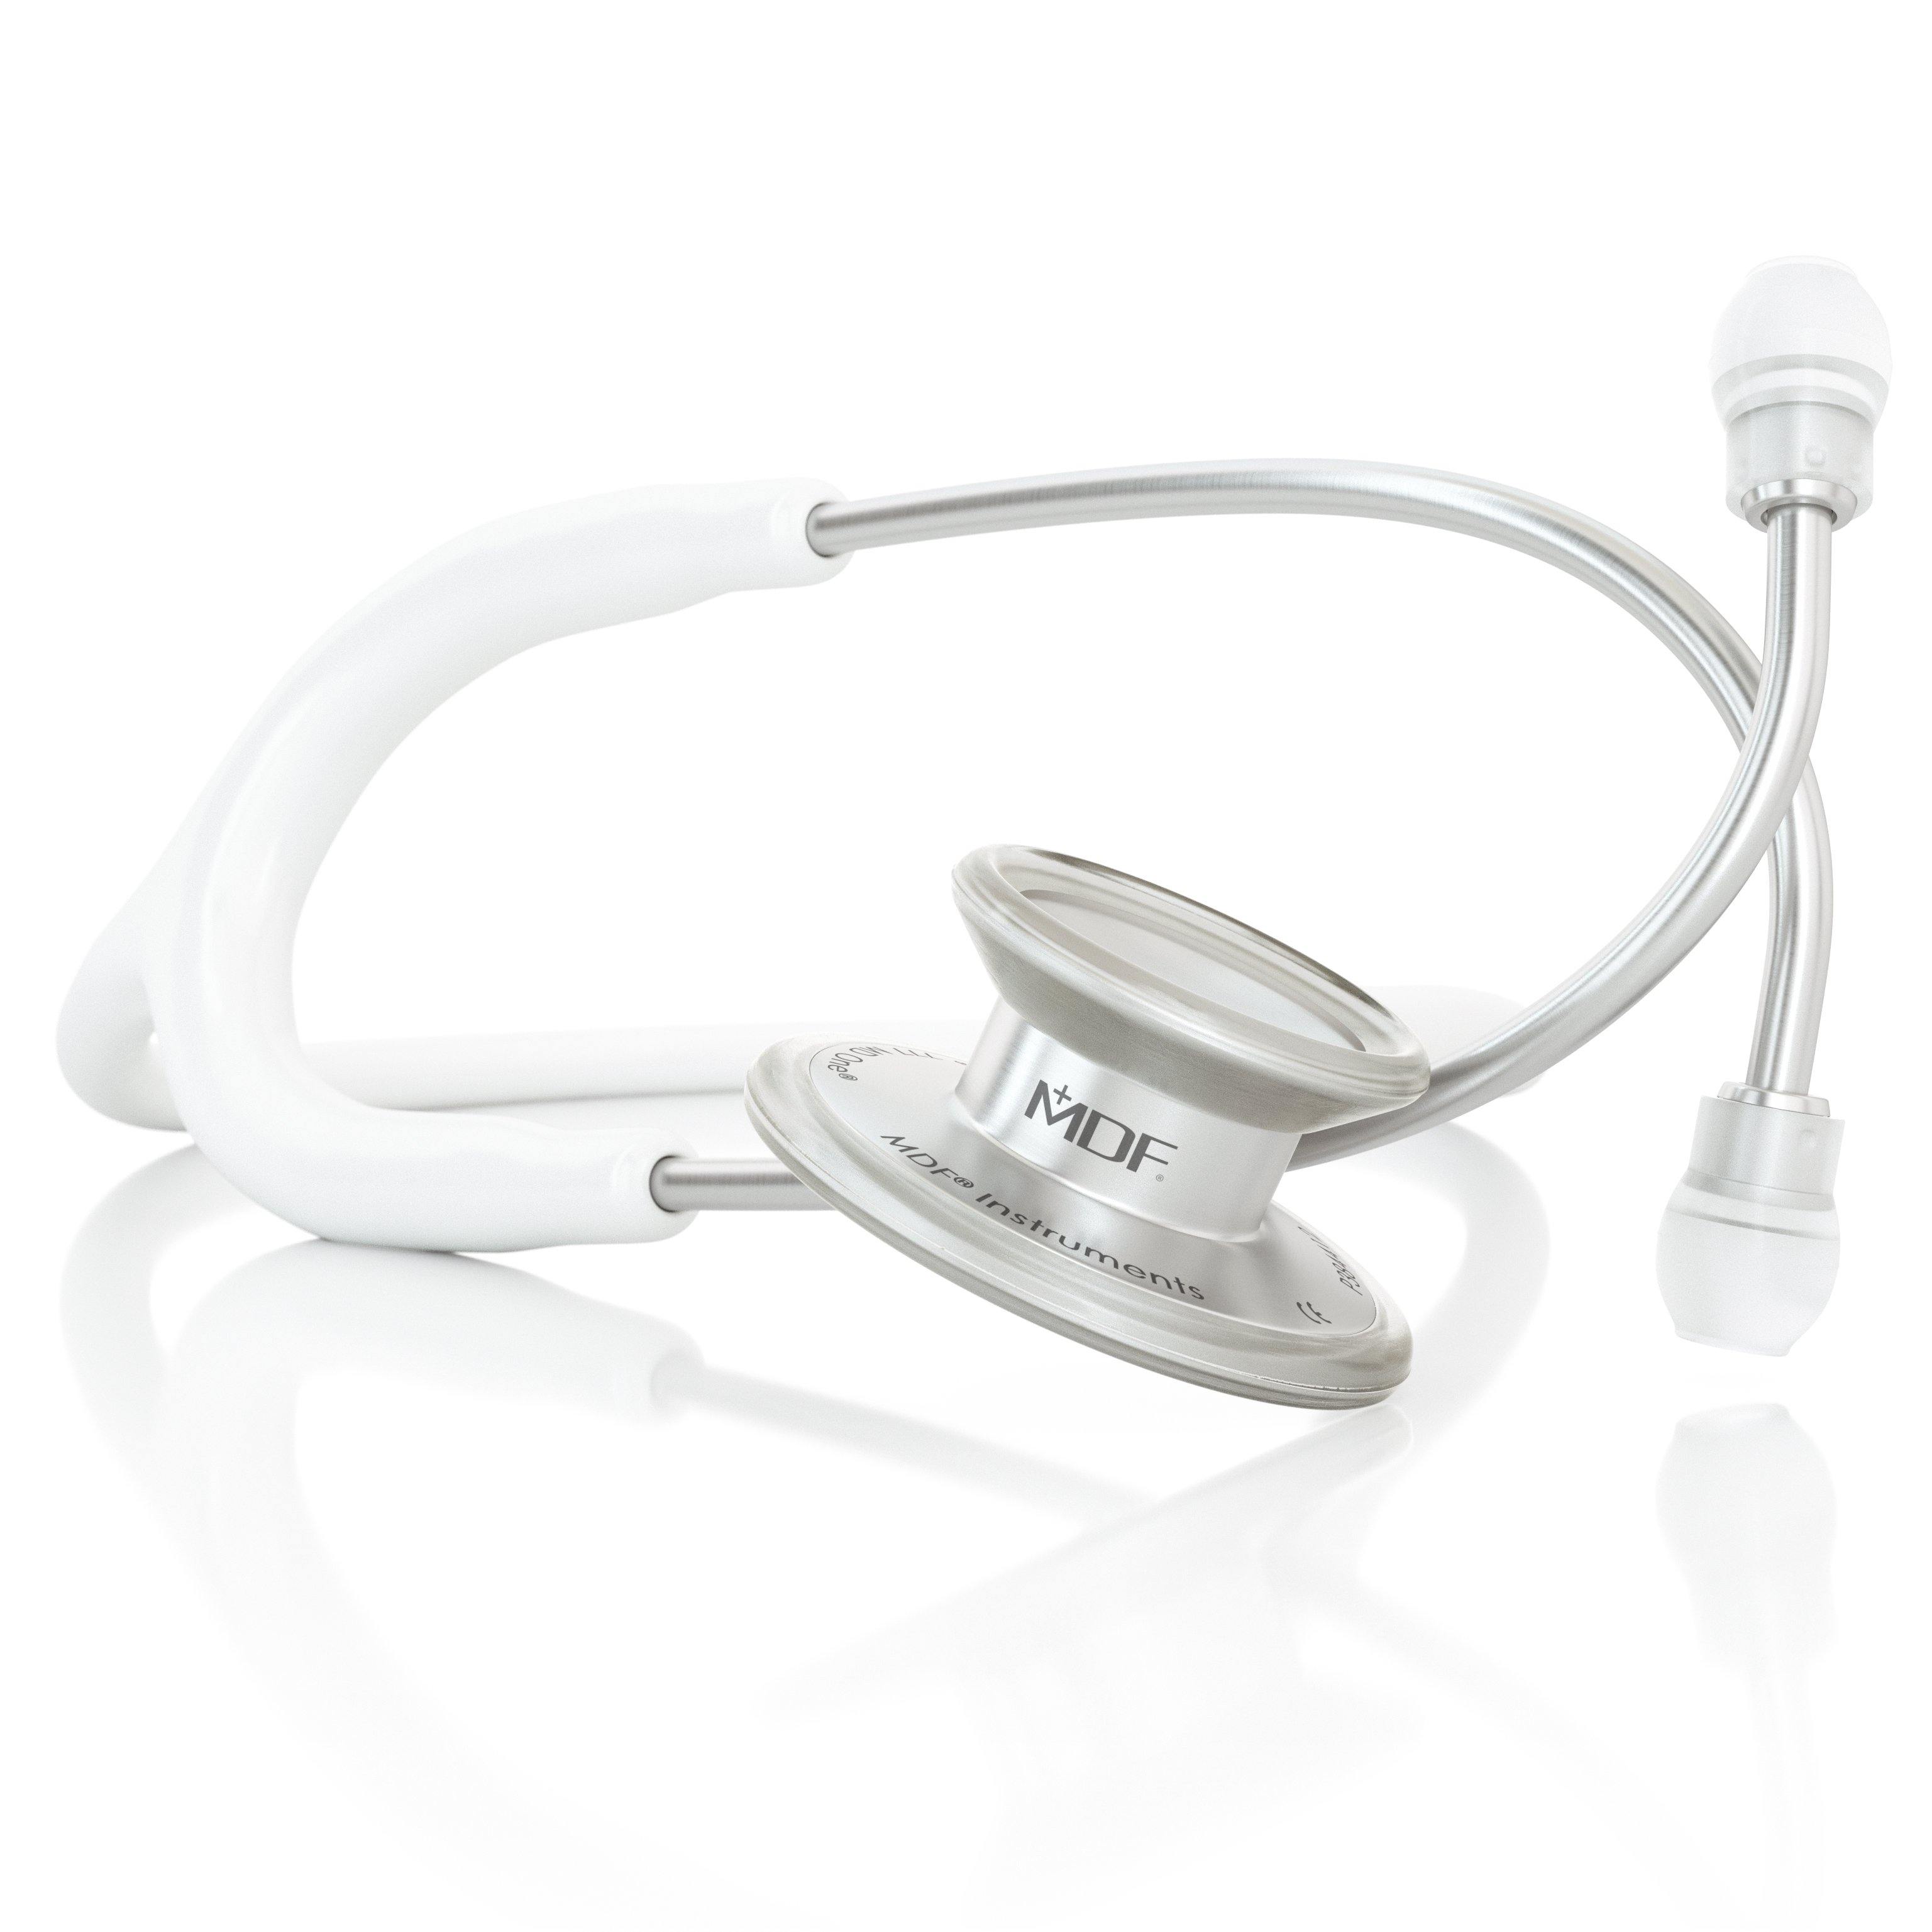 MDF Instruments® Stethoscope MD One® Stainless Steel White